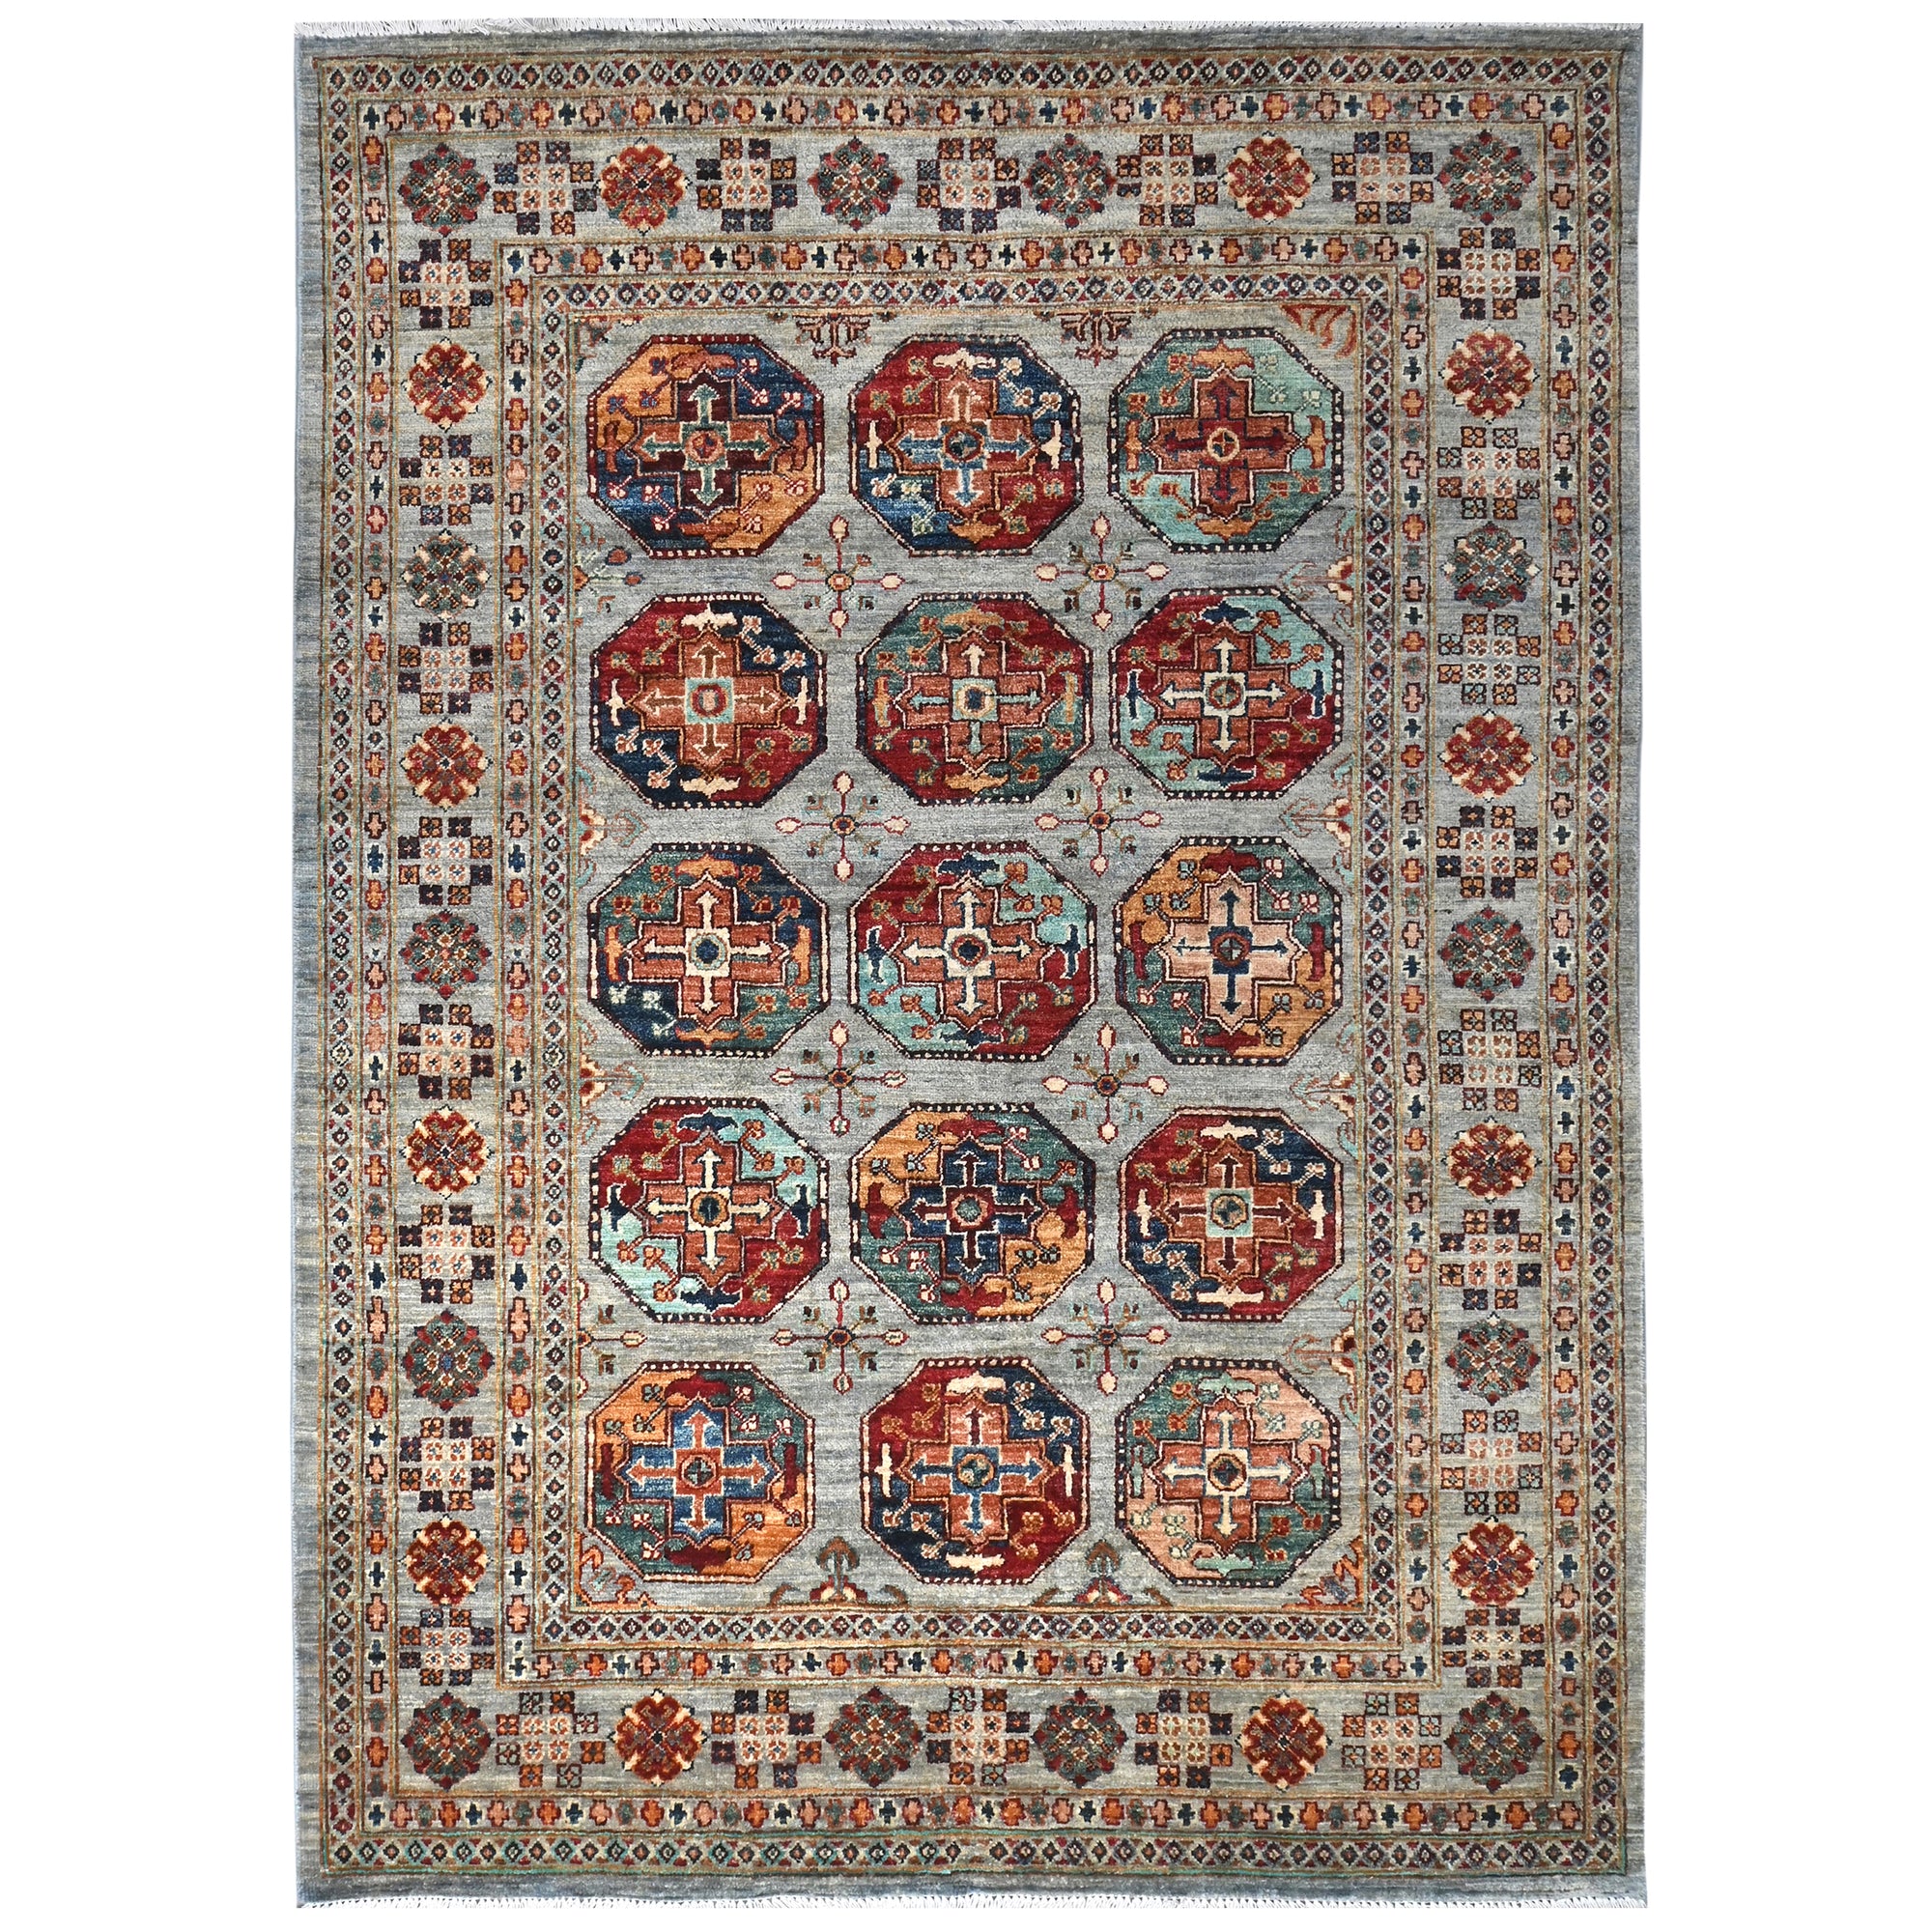 Fine Hand-knotted Wool Rug 157cm x 210cm